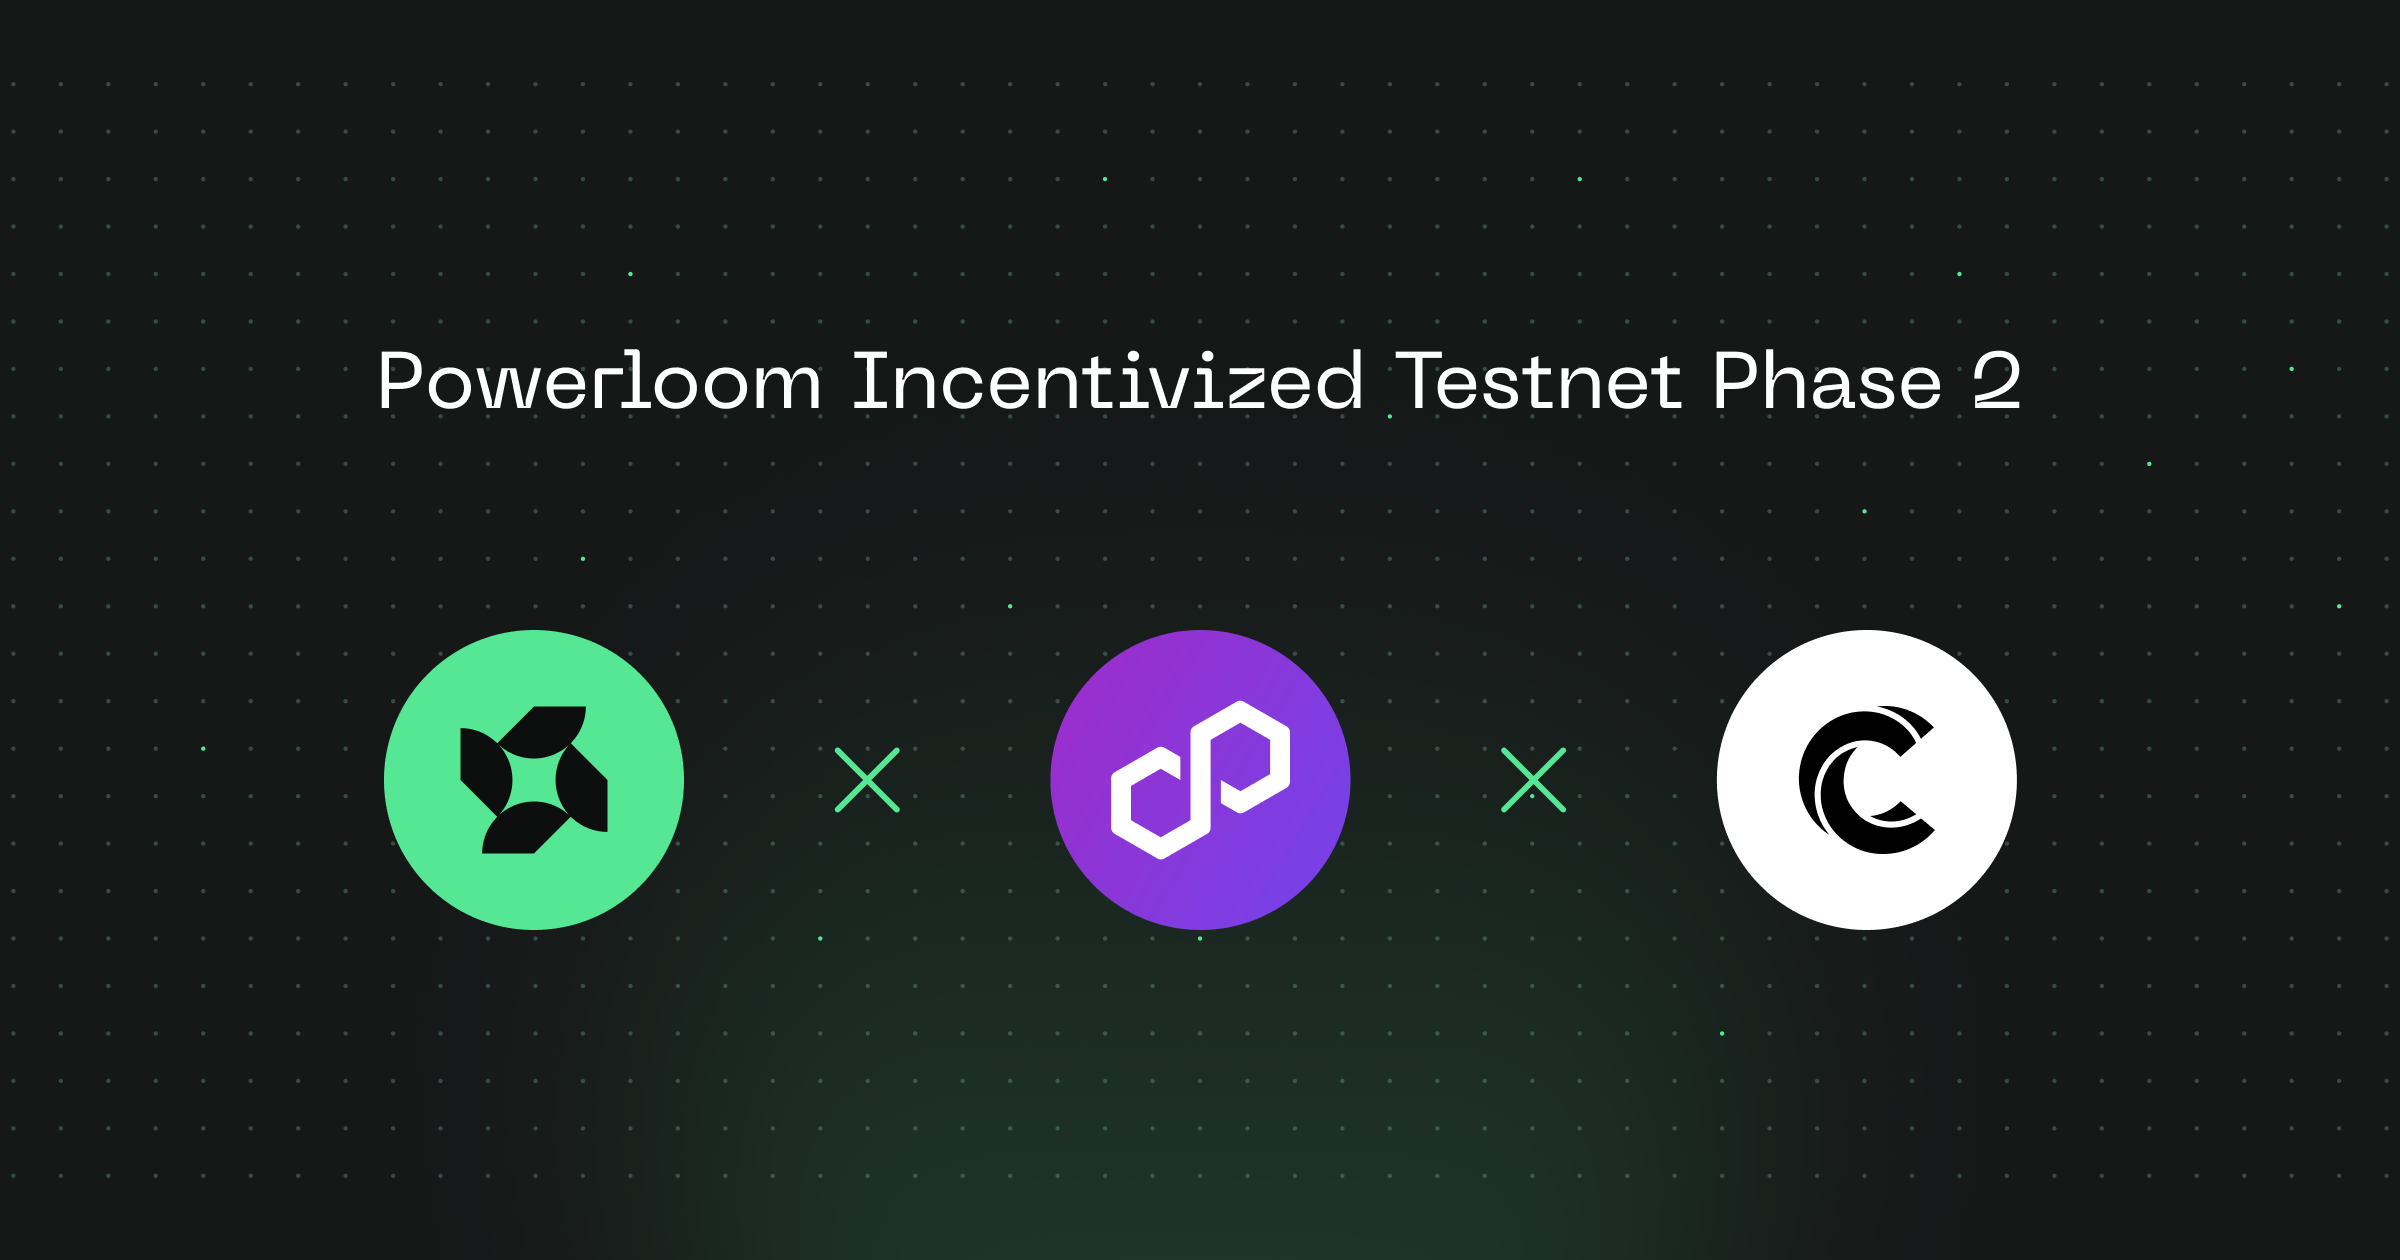 Powerloom Expands Its Incentivized Testnet, Partners with Polygon